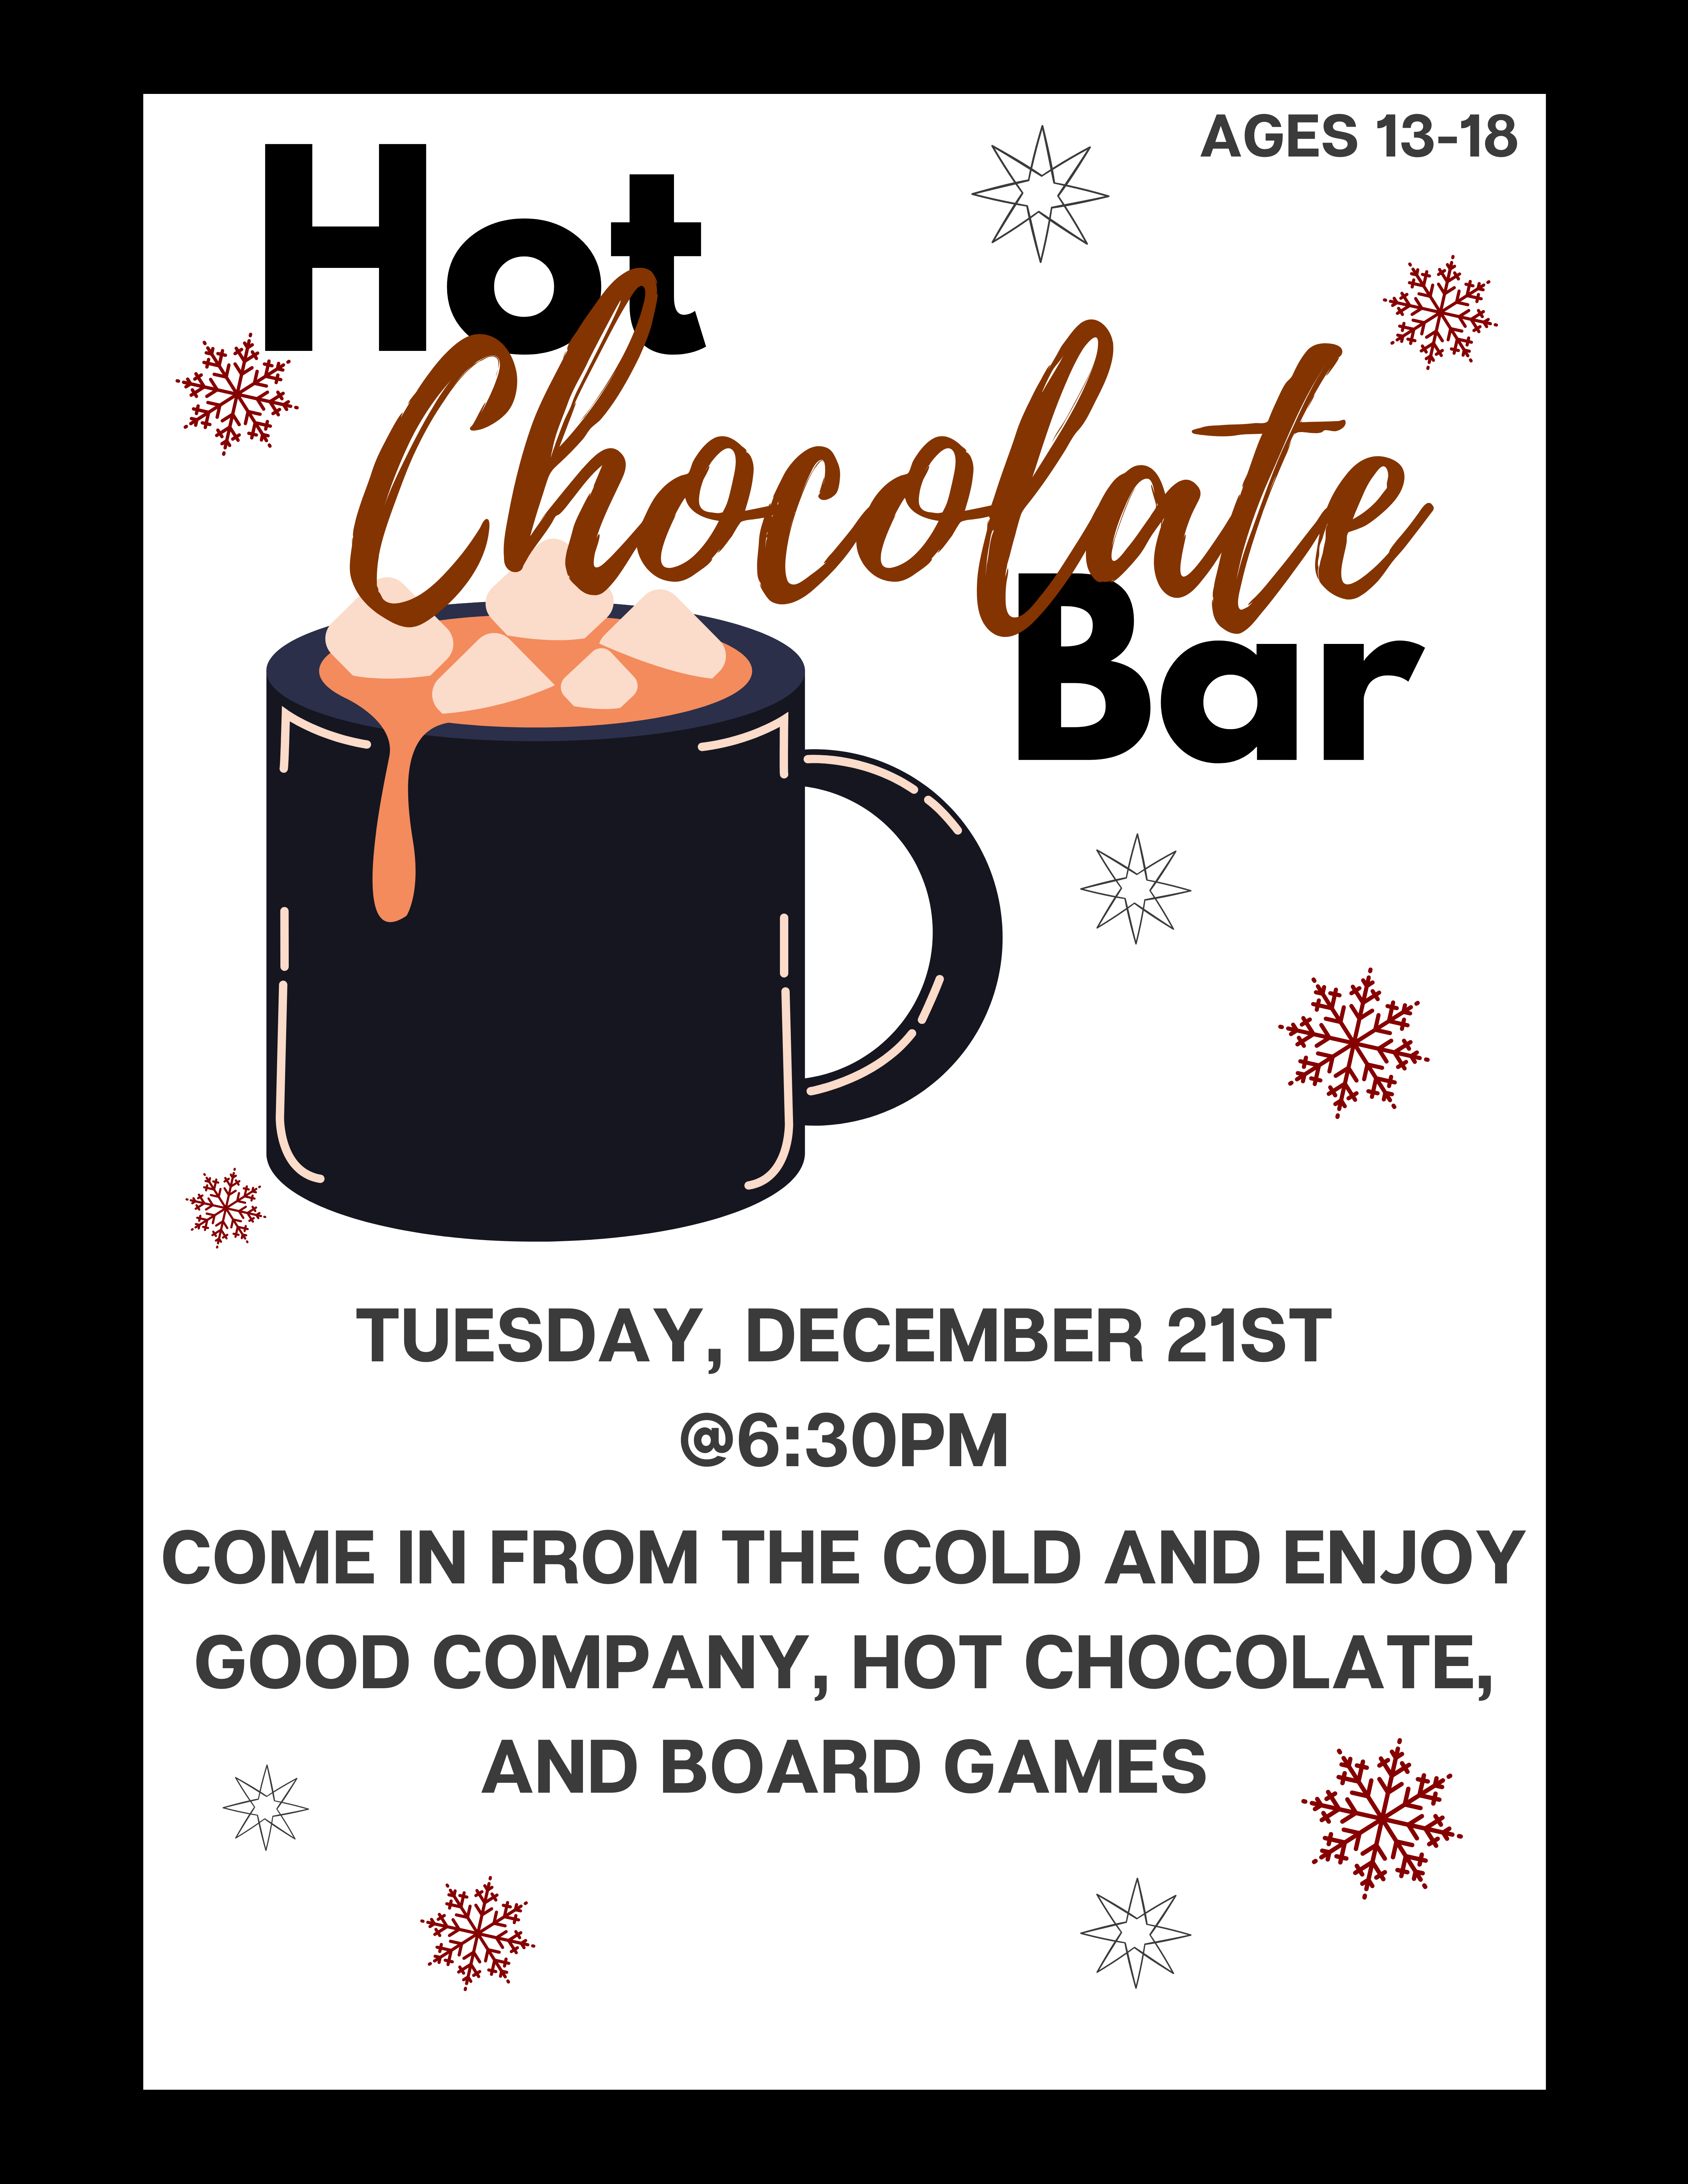 Text reading "Hot Chocolate Bar - Ages 13-18" with the image of a mug of hot chocolate. More text reads "Tuesday, December 21st @6:30pm. Come in from the cold and enjoy good company, hot chocolate, and board games."